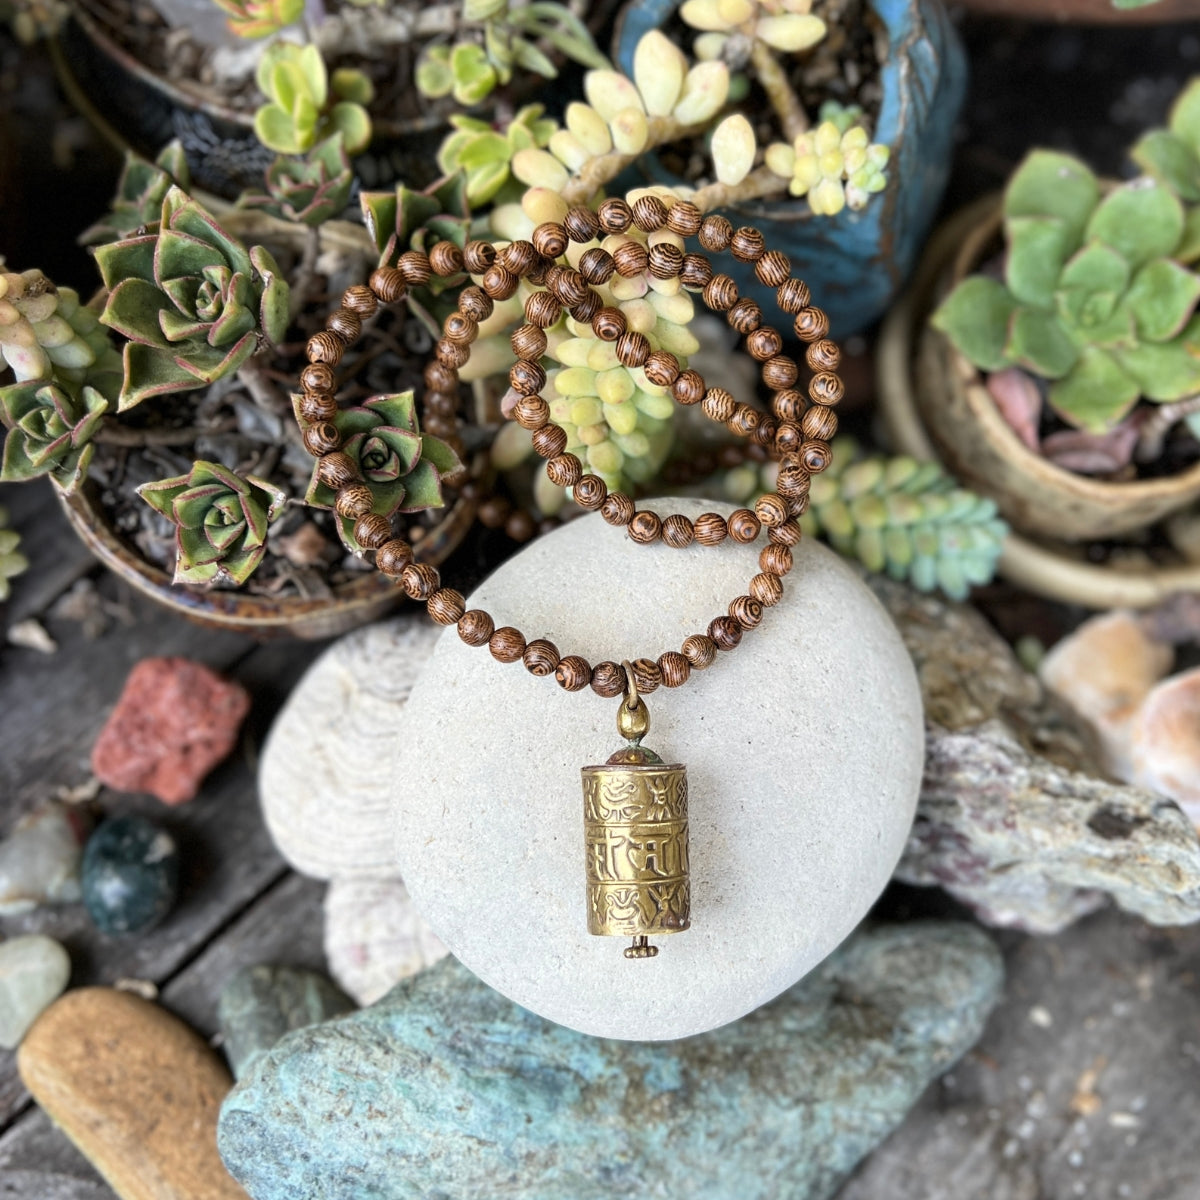 Experience the divine synergy of spirituality and style with our "Prayer Wheel - Wood Necklace for Many Blessings." May it bring you a sense of tranquility and invite countless blessings into your life's journey.